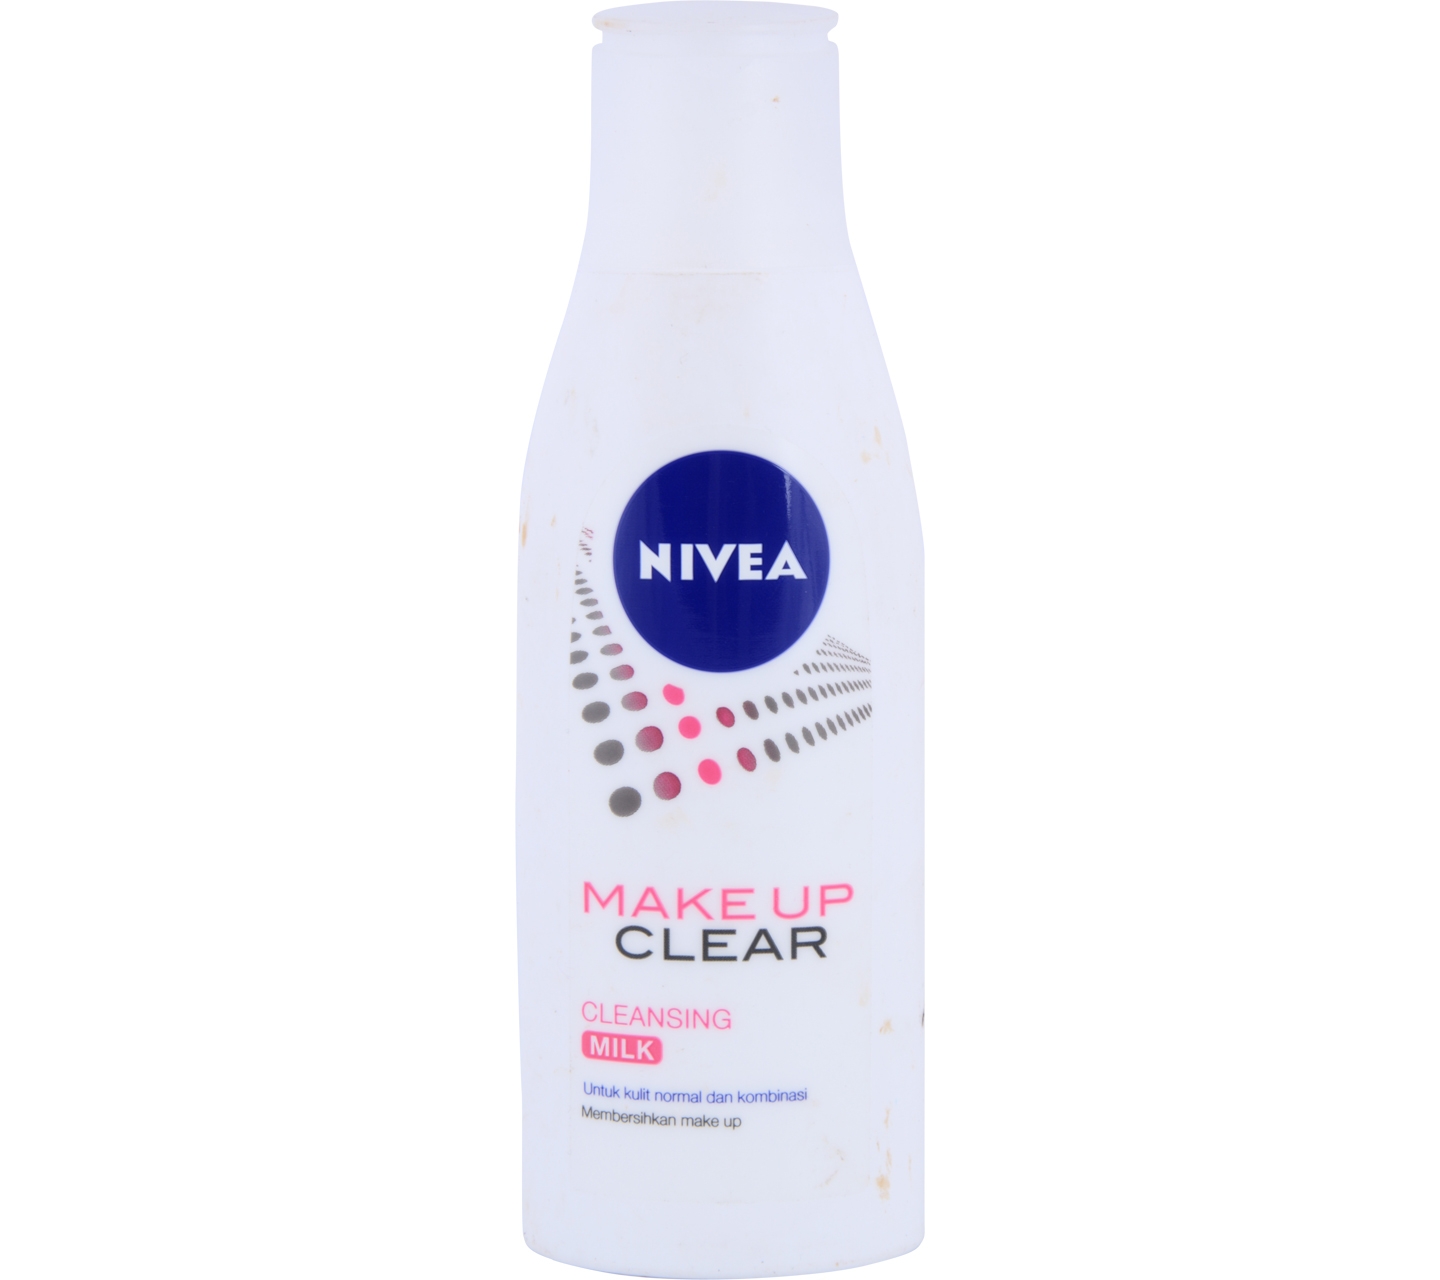 Nivea Make Up Clear Cleansing Milk Faces